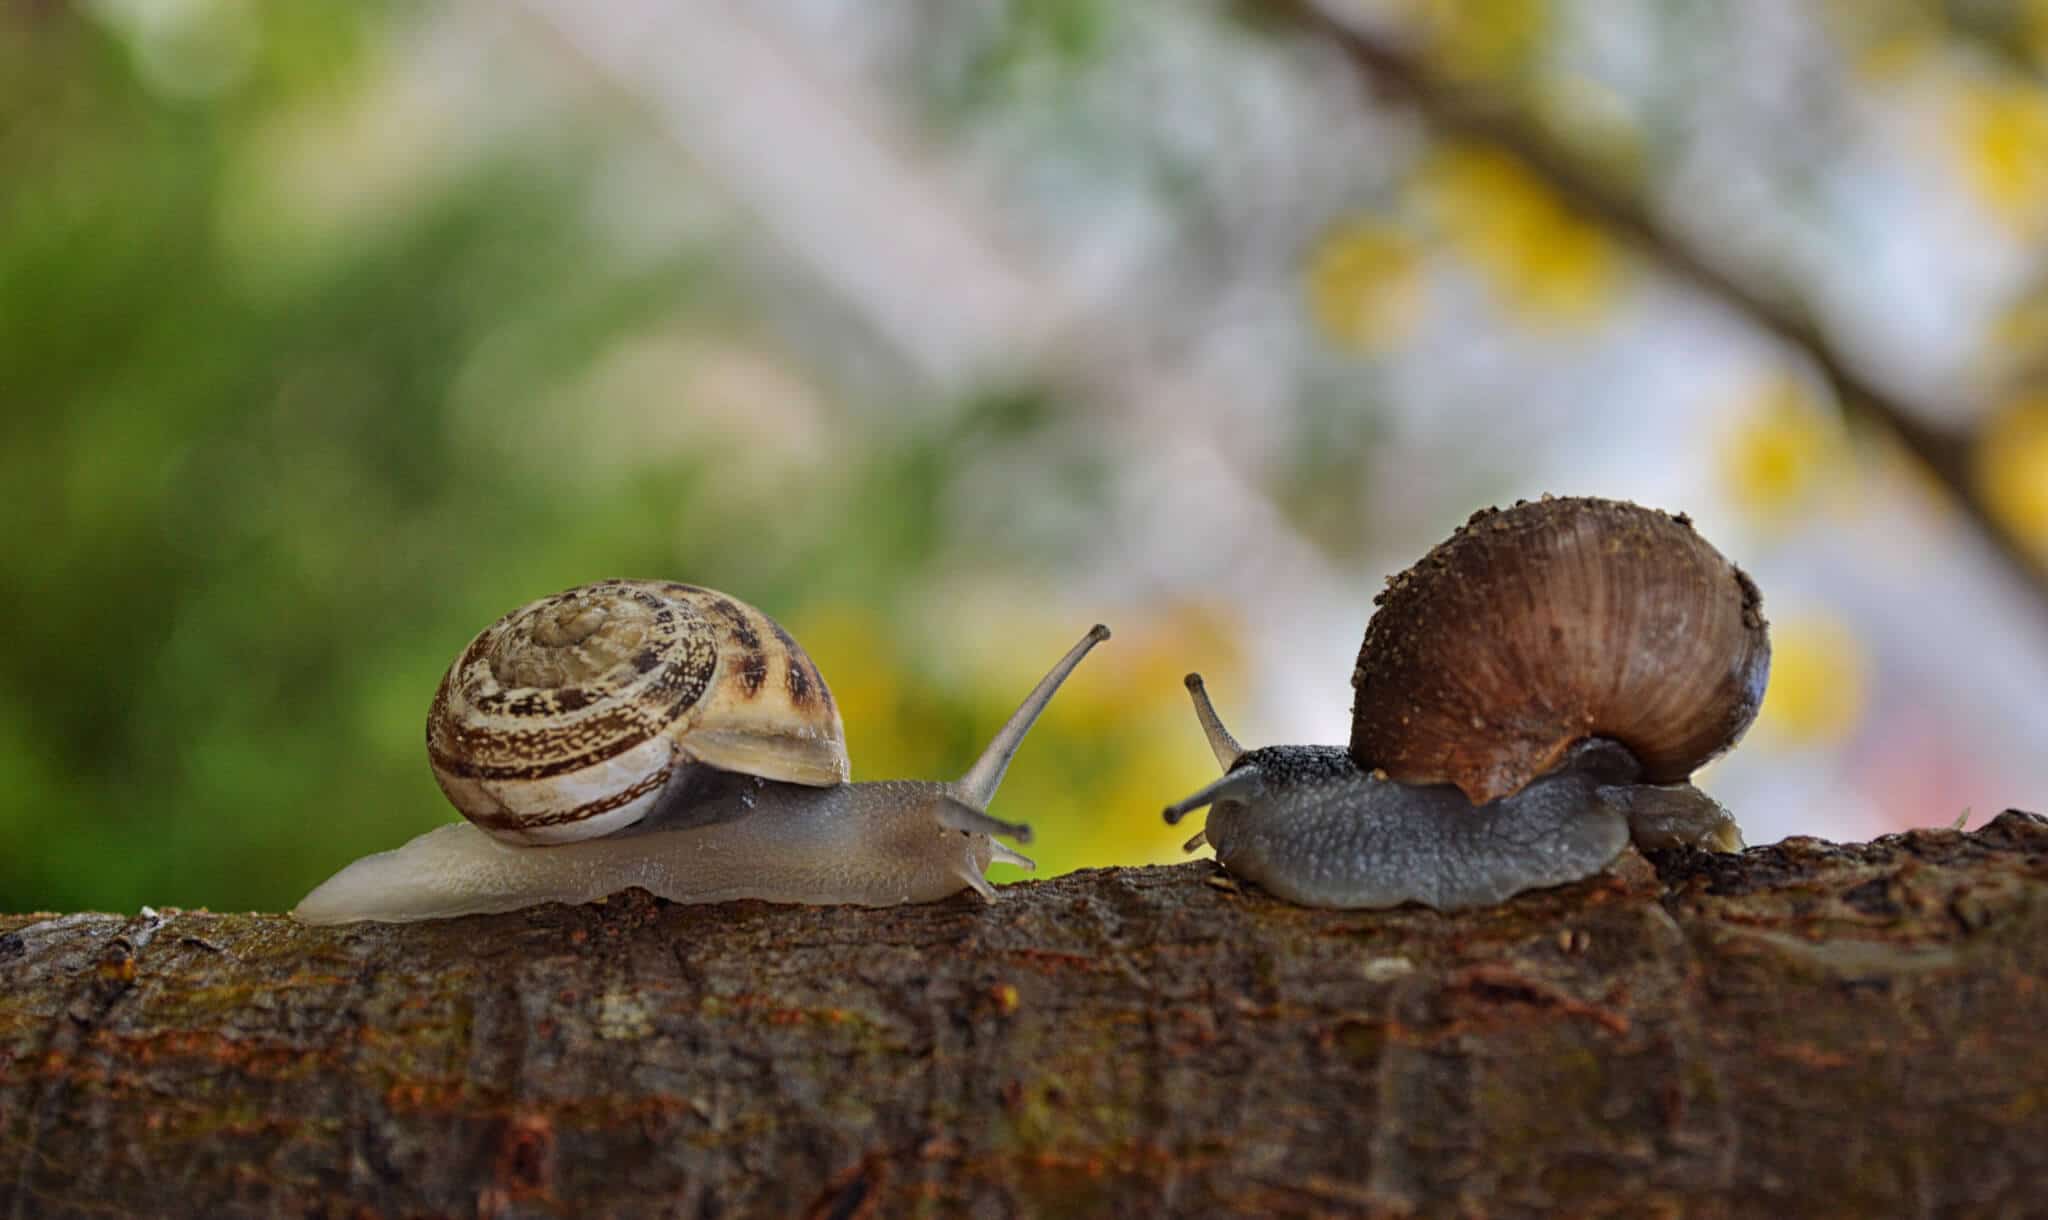 two snails 